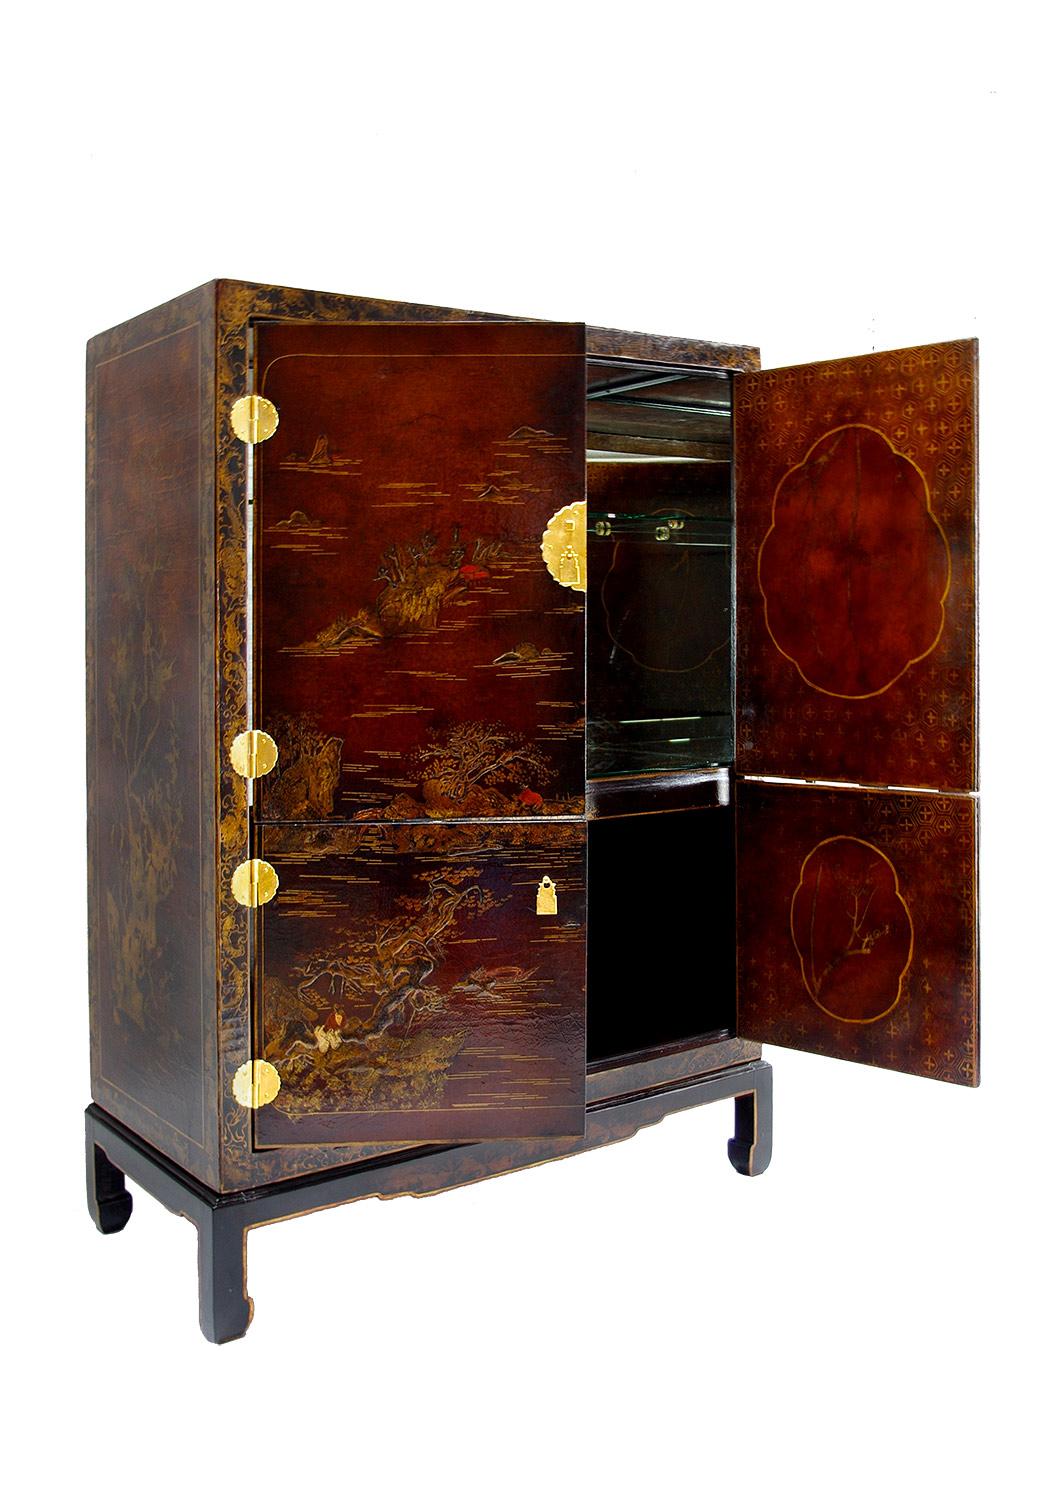 Brown lacquer background and gilt decor
1900 period
French work
Chinese style
Gilt bronze such as: Hinge, locker, handles
Four doors with a mirrored glass interior and a glass shelf in the upper part
Standing on a base.